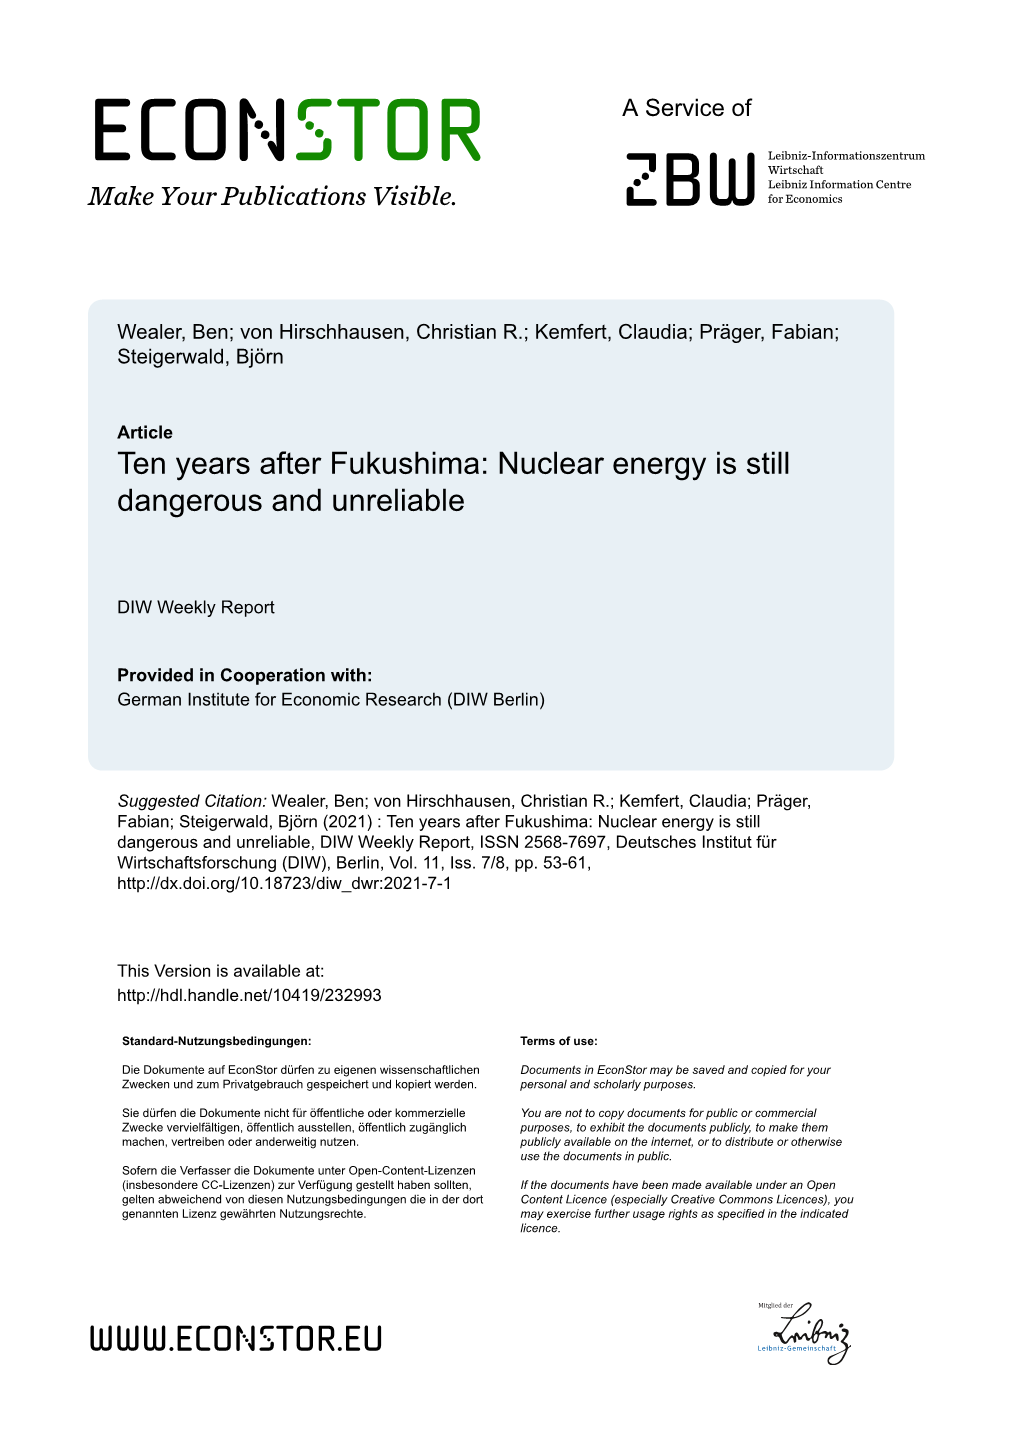 Ten Years After Fukushima: Nuclear Energy Is Still Dangerous and Unreliable